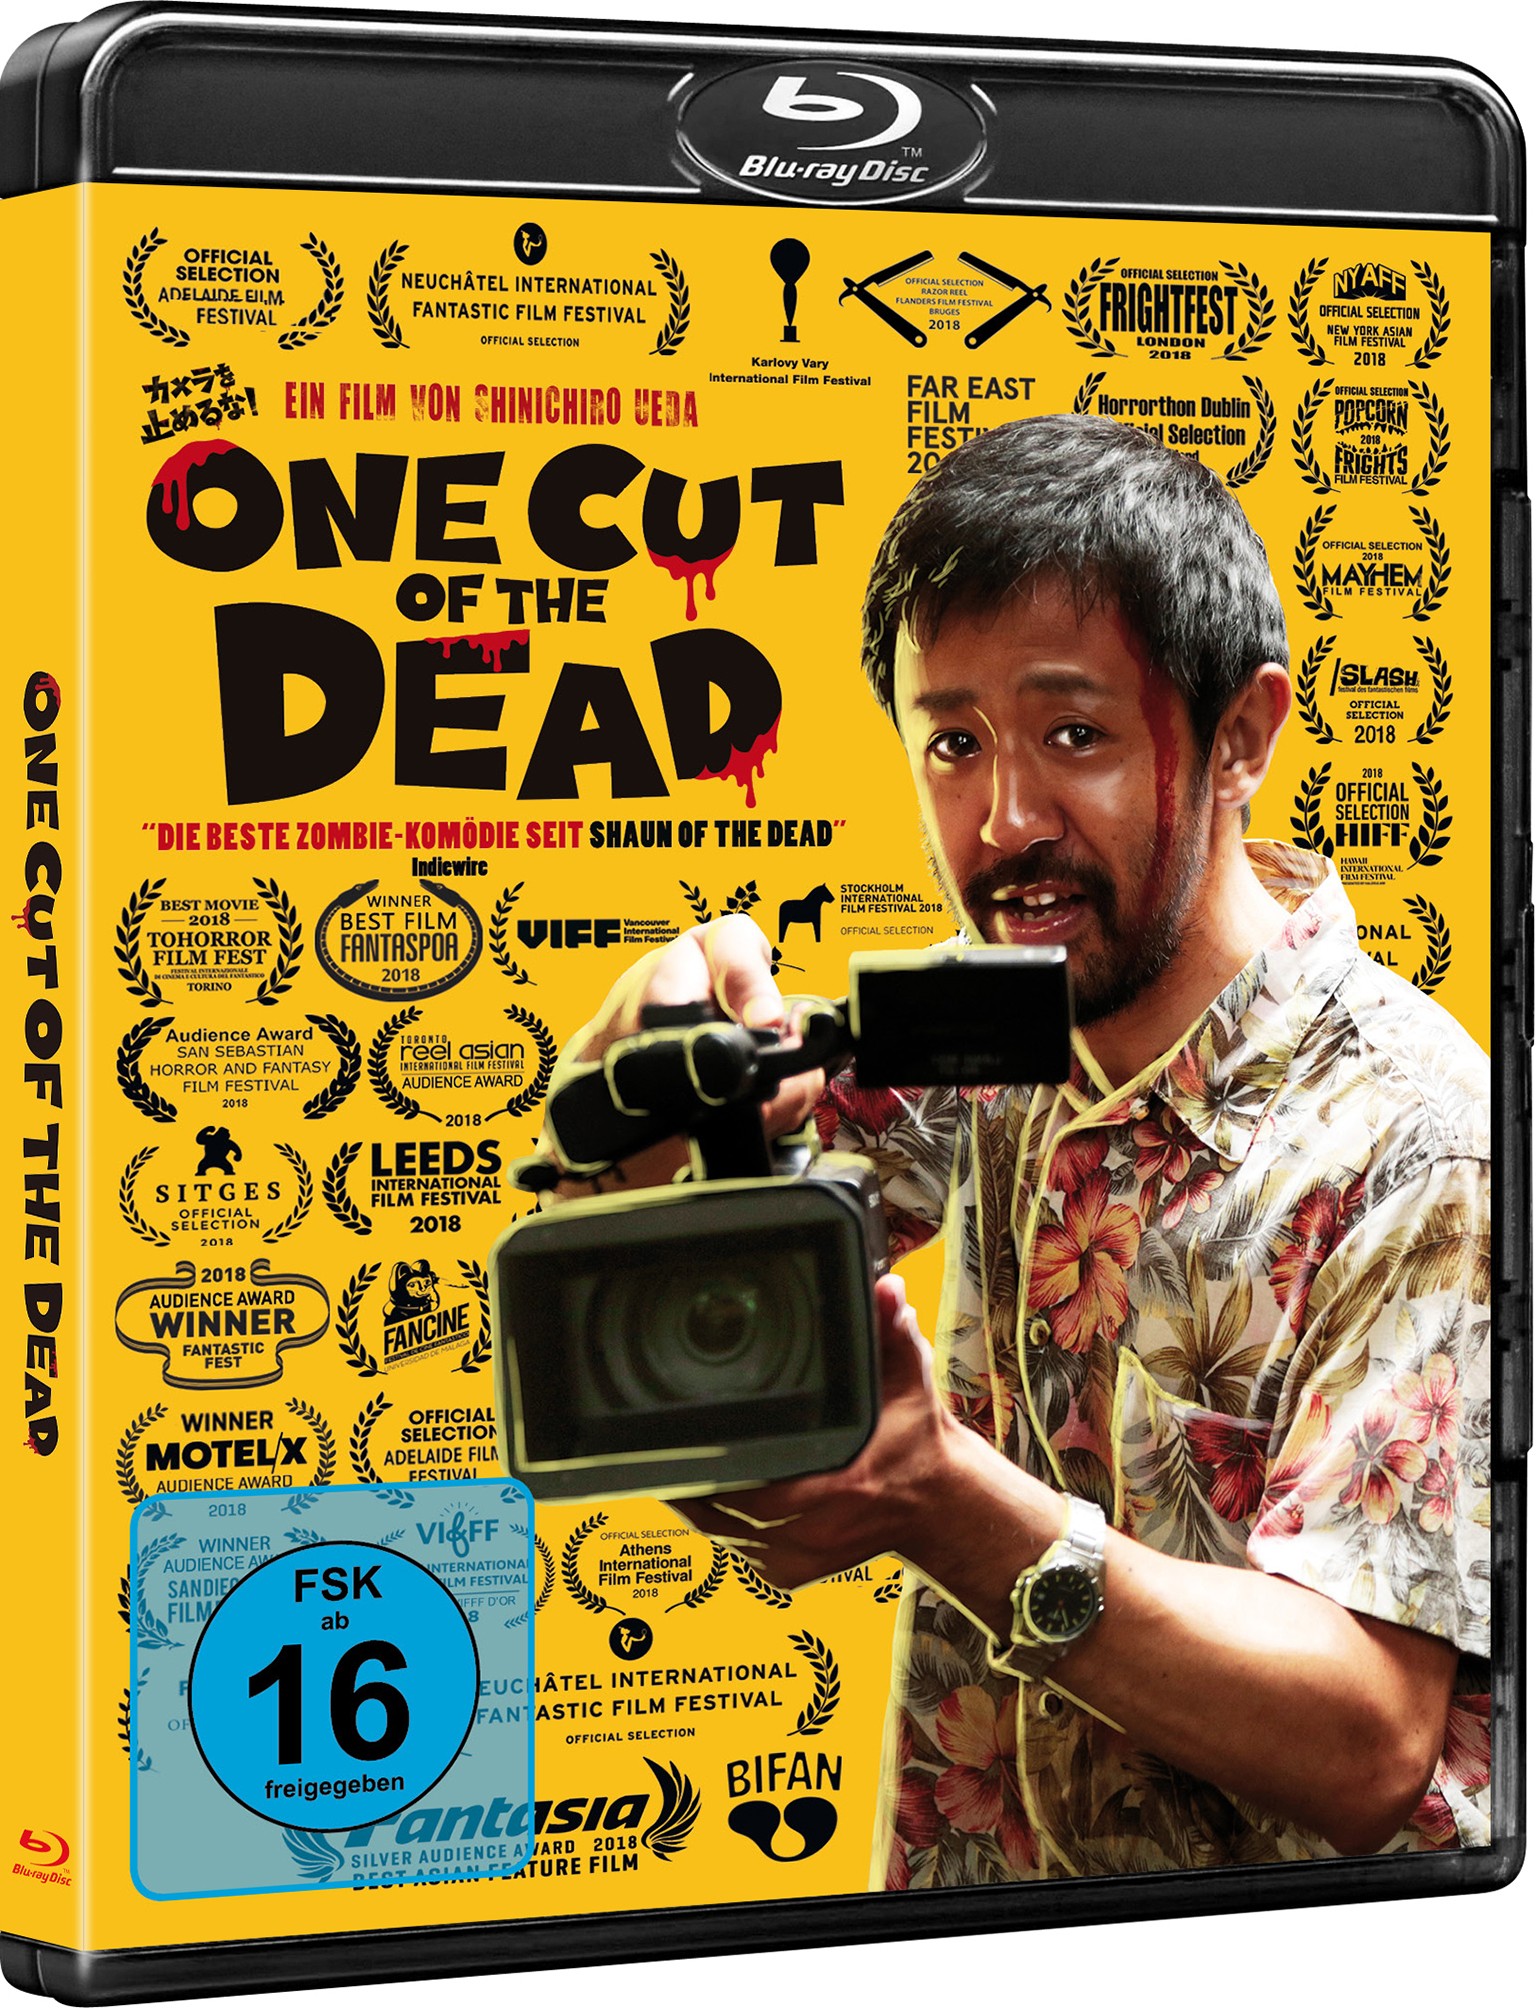 One Cut of the Dead (Blu-ray) Image 2